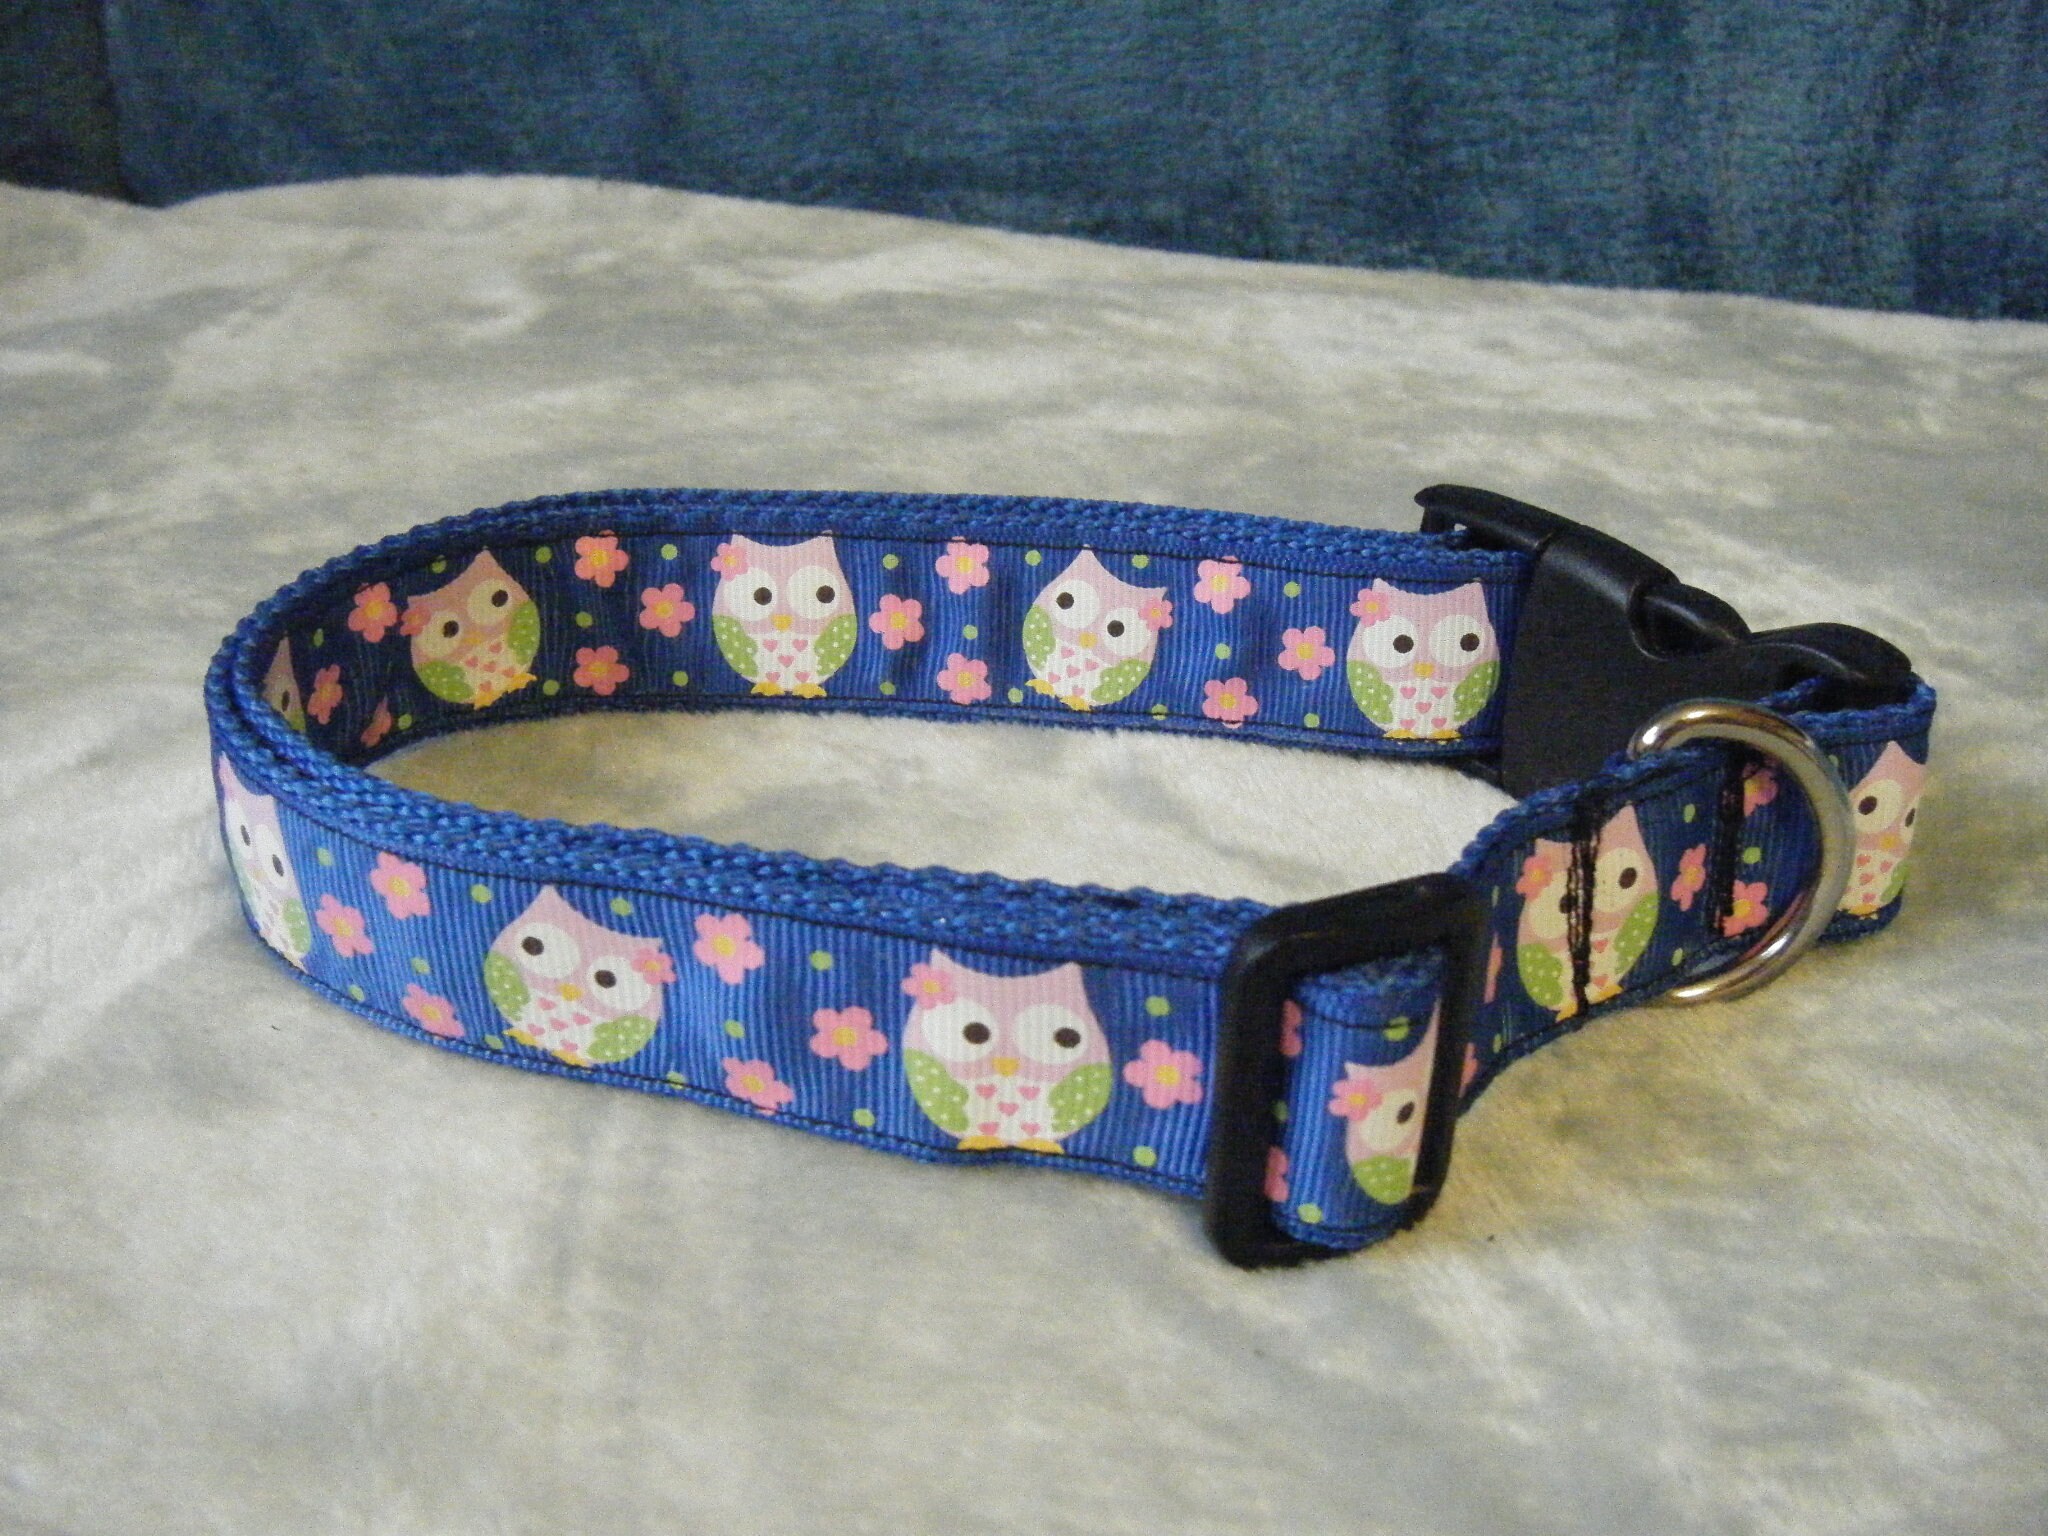 Skull and Bones Dog or Cat Collar for Pets Size Large 1 Wide and 15-25 Long by Oh My Pawd 